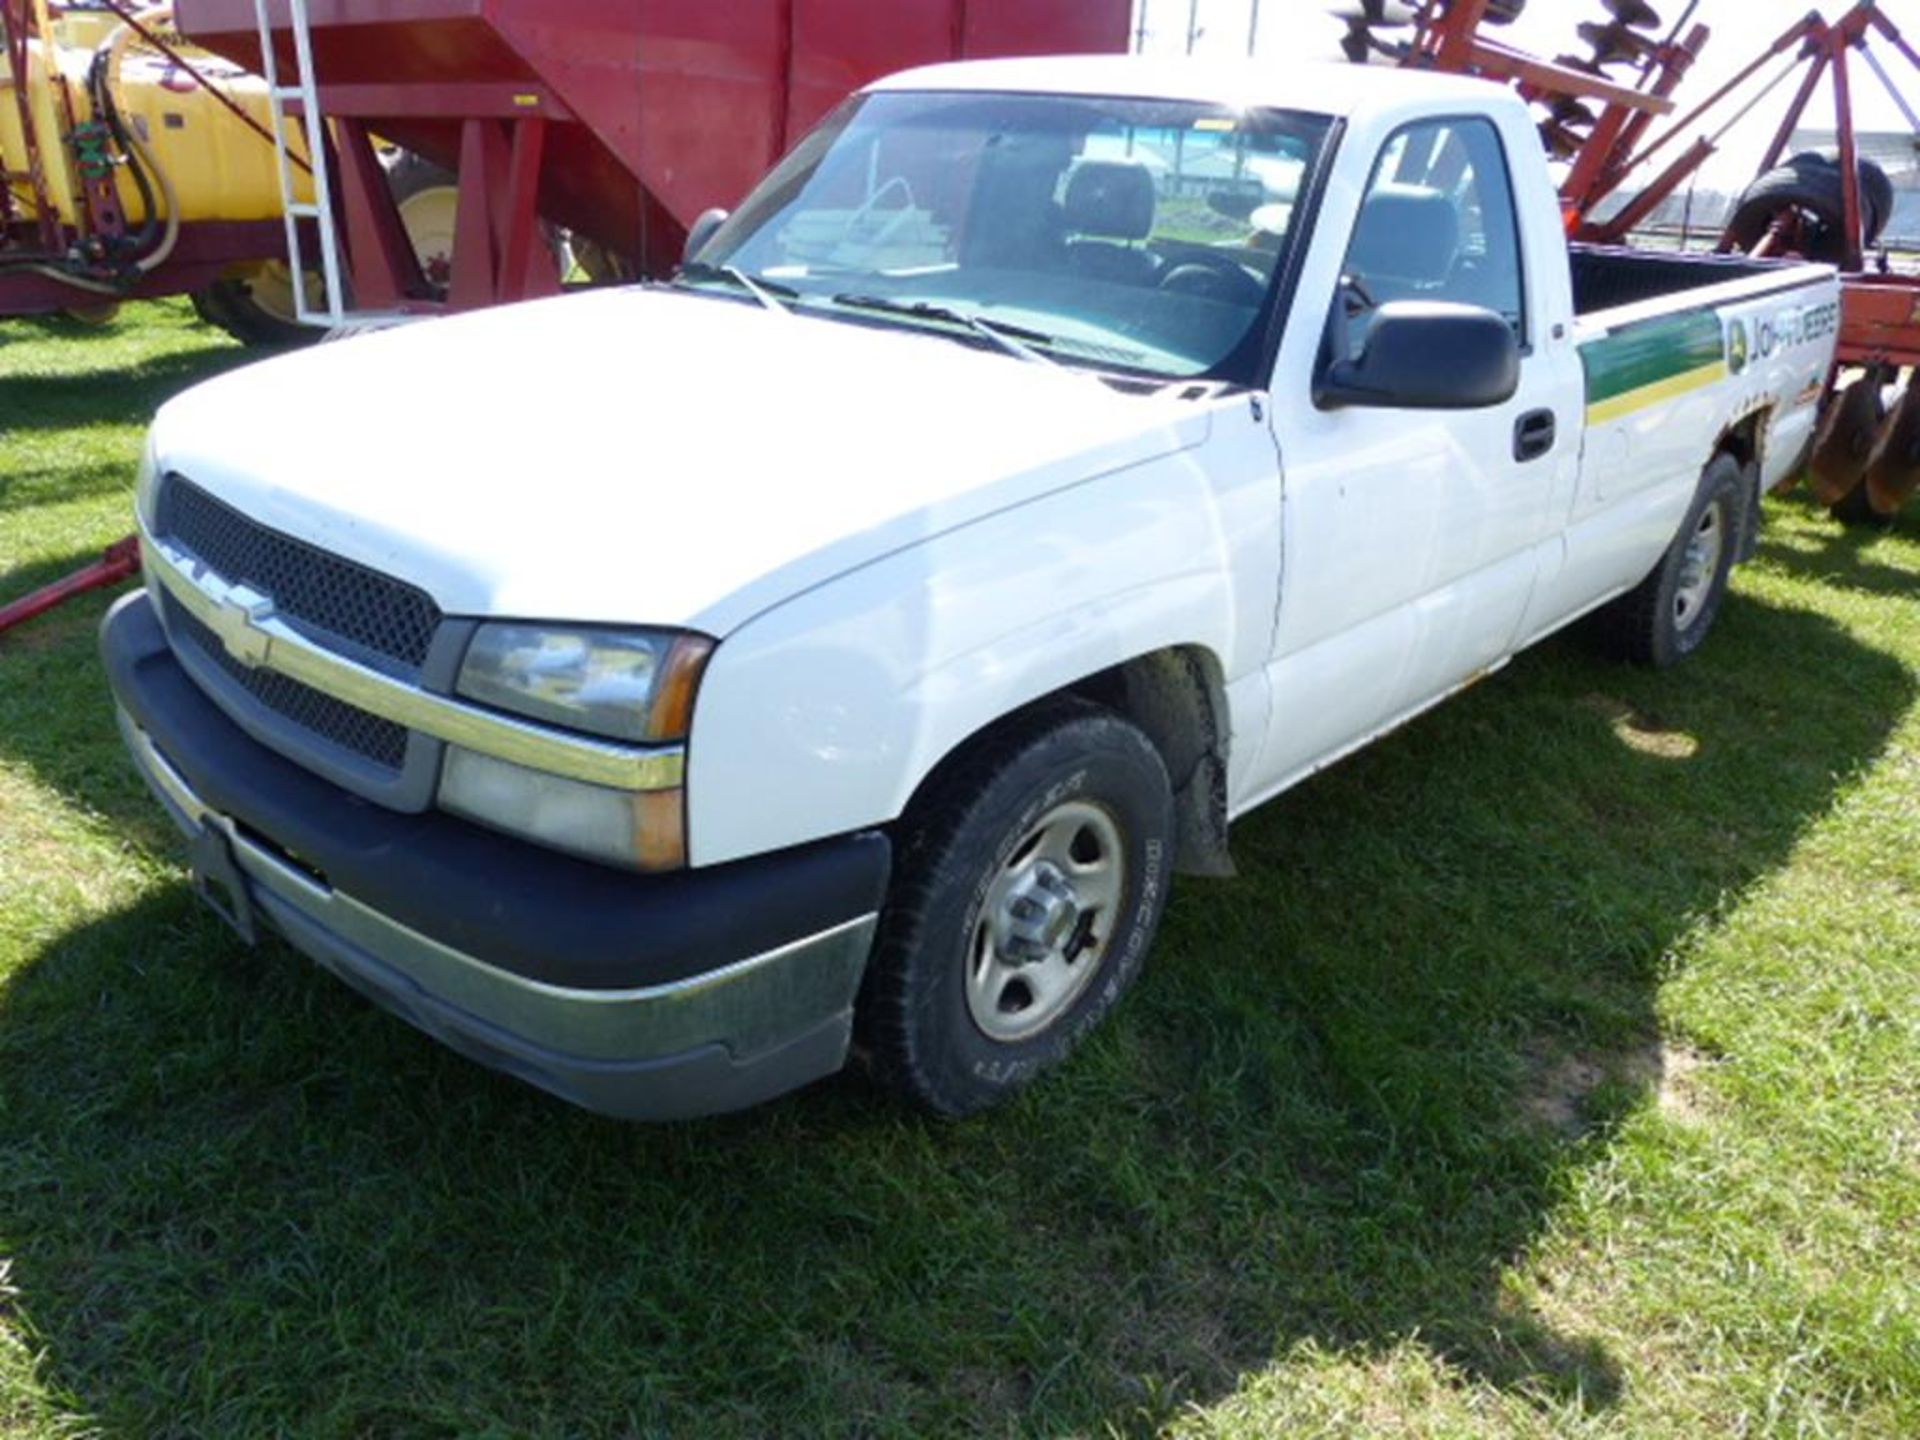 2003 CHEVY 1500 REG CAB 2WD PICK UP, 8' BED, WHITE, TRAILER HITCH, V-8, AUTO, CLOTH